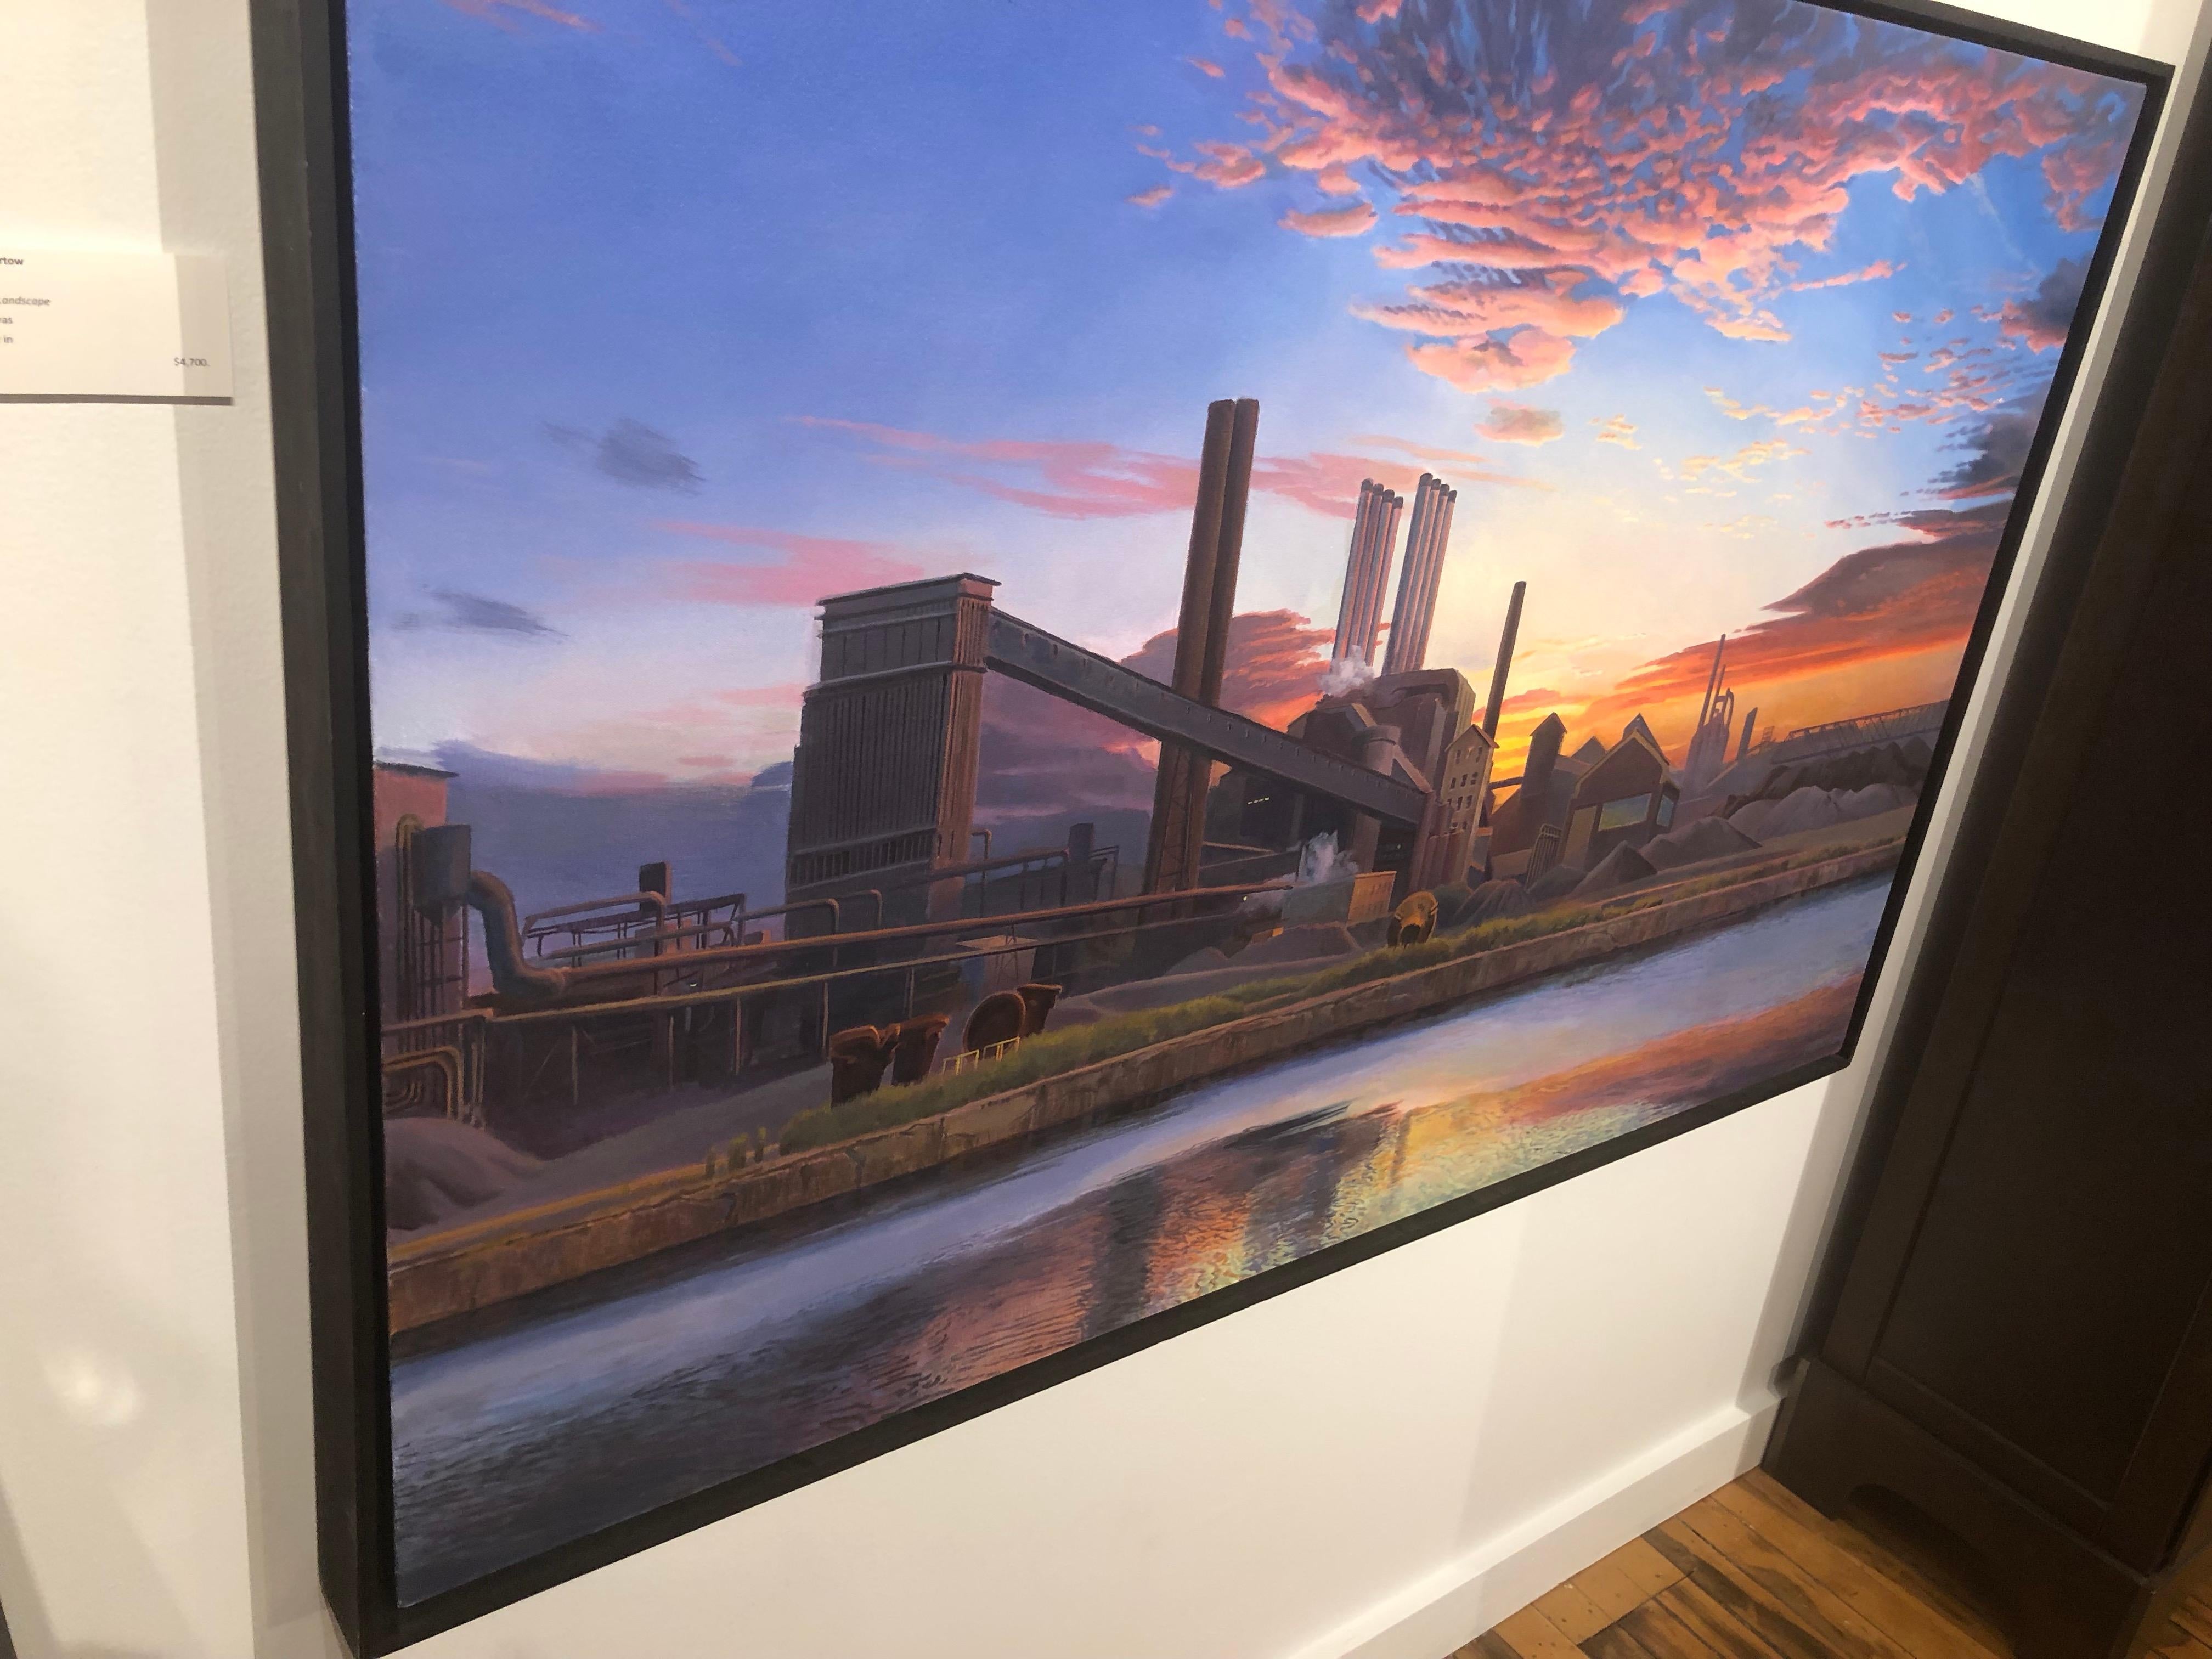 American Landscape - Iconic American Steel Mill Bathed in Orange Sunset Light 2